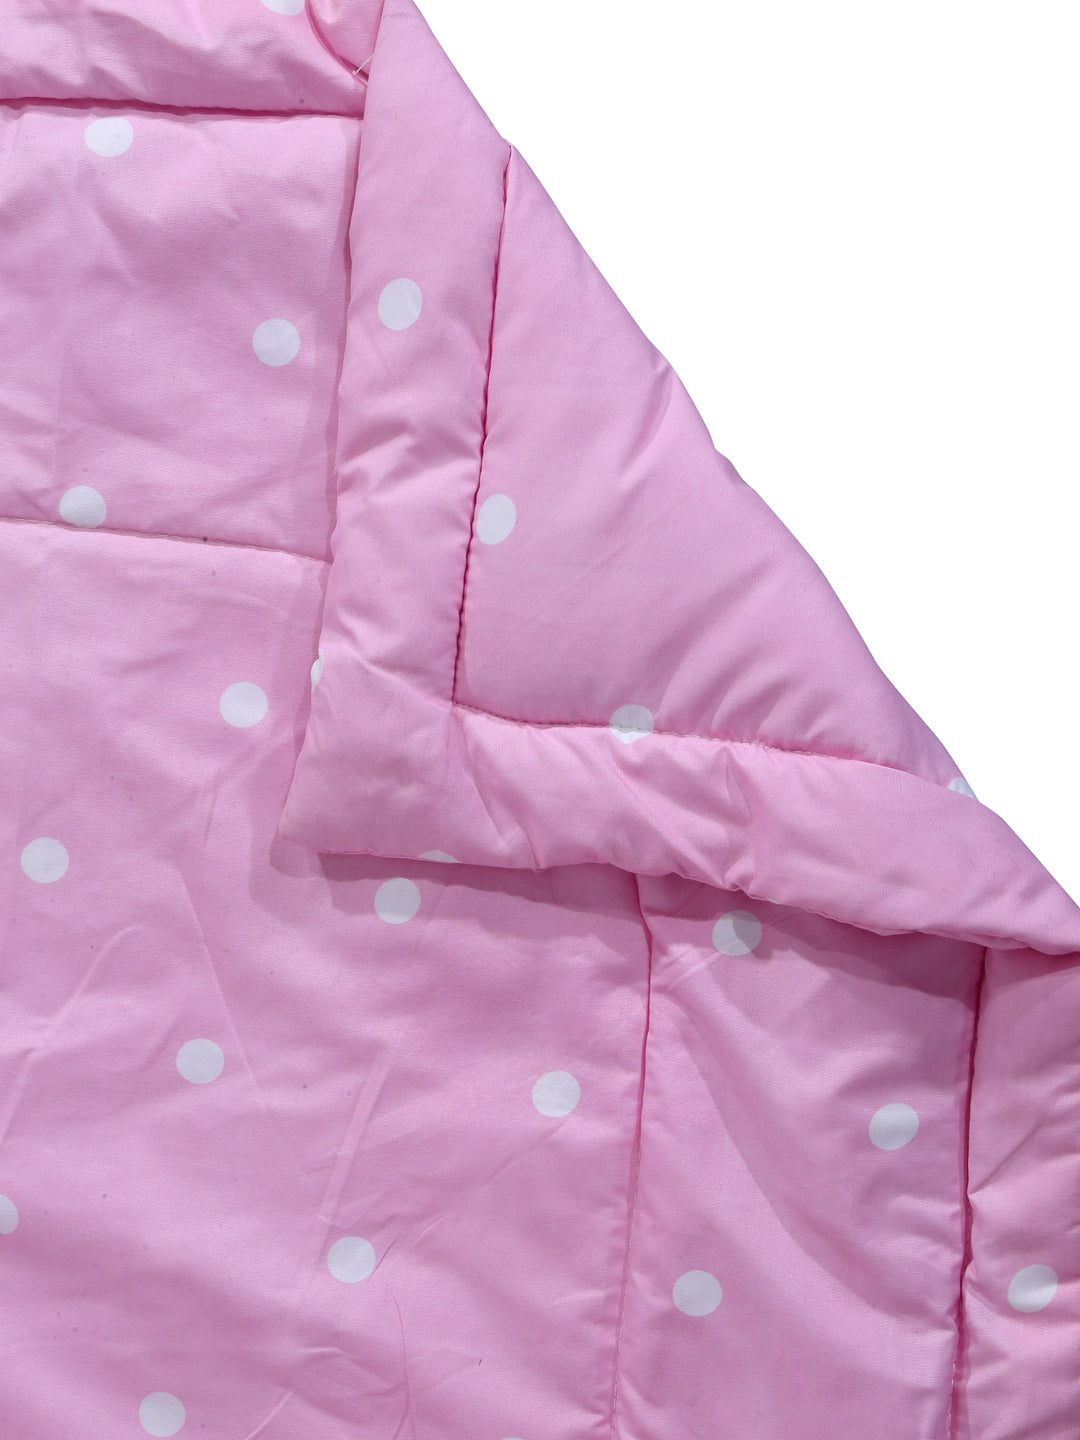 Arrabi Pink Polka dot TC Cotton Blend Double Size Comforter Bedding Set with 2 Pillow Cover